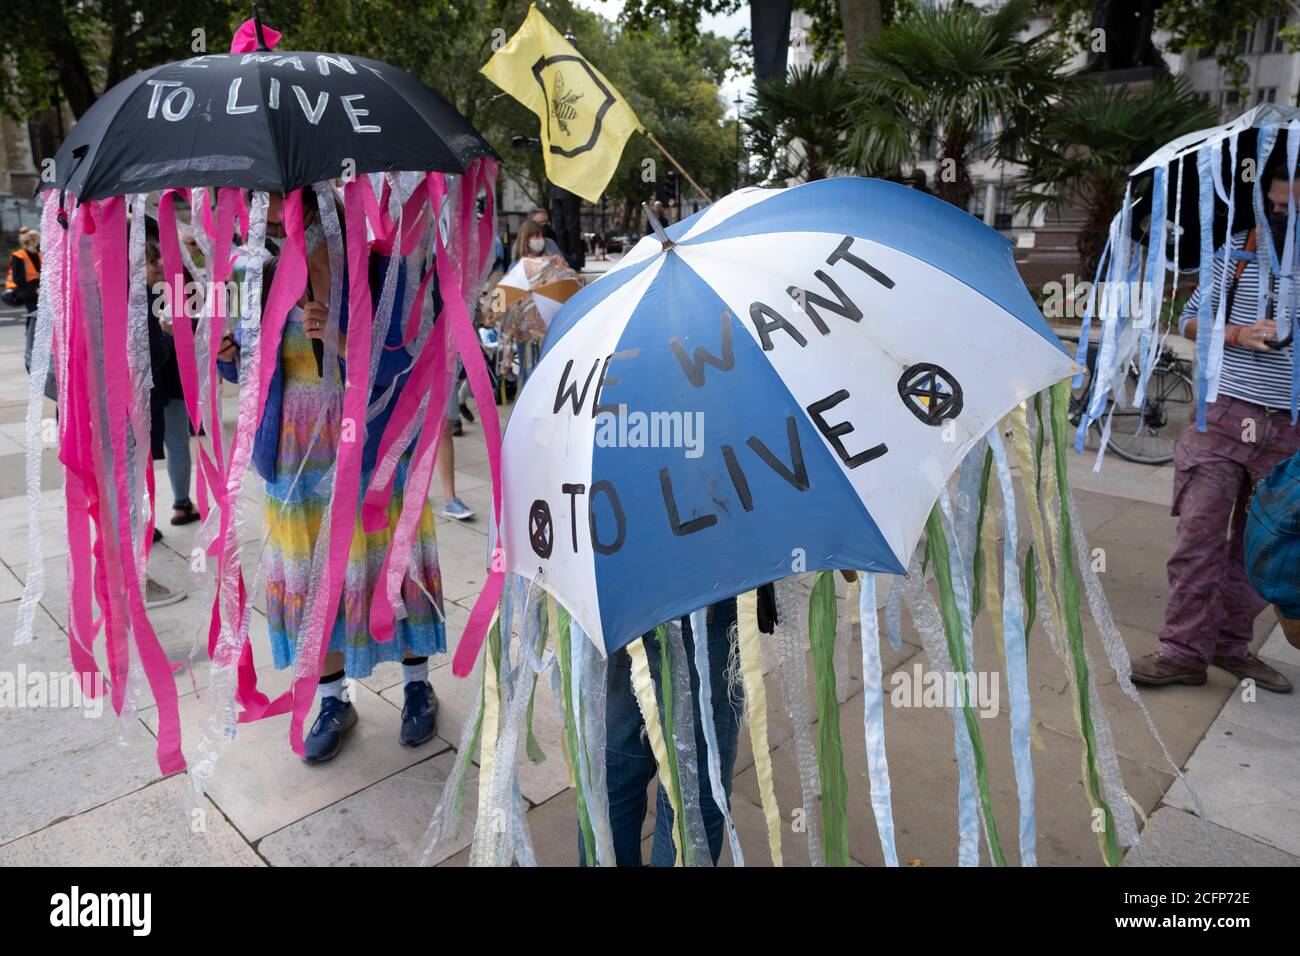 Extinction Rebellion activists dressed as jellyfish at the Marine Rebellion march on 6th September 2020 in London, United Kingdom. Ocean Rebellion, Sea Life Extinction, Animal Rebellion and Extinction Rebellion joined together to celebrate the biodiversity found in our seas, and to grieve at the destruction of the Earth’s oceans and marine life due to climate breakdown and human interference, and the loss of lives, homes and livelihoods from rising sea levels. Extinction Rebellion is a climate change group started in 2018 and has gained a huge following of people committed to peaceful protests Stock Photo